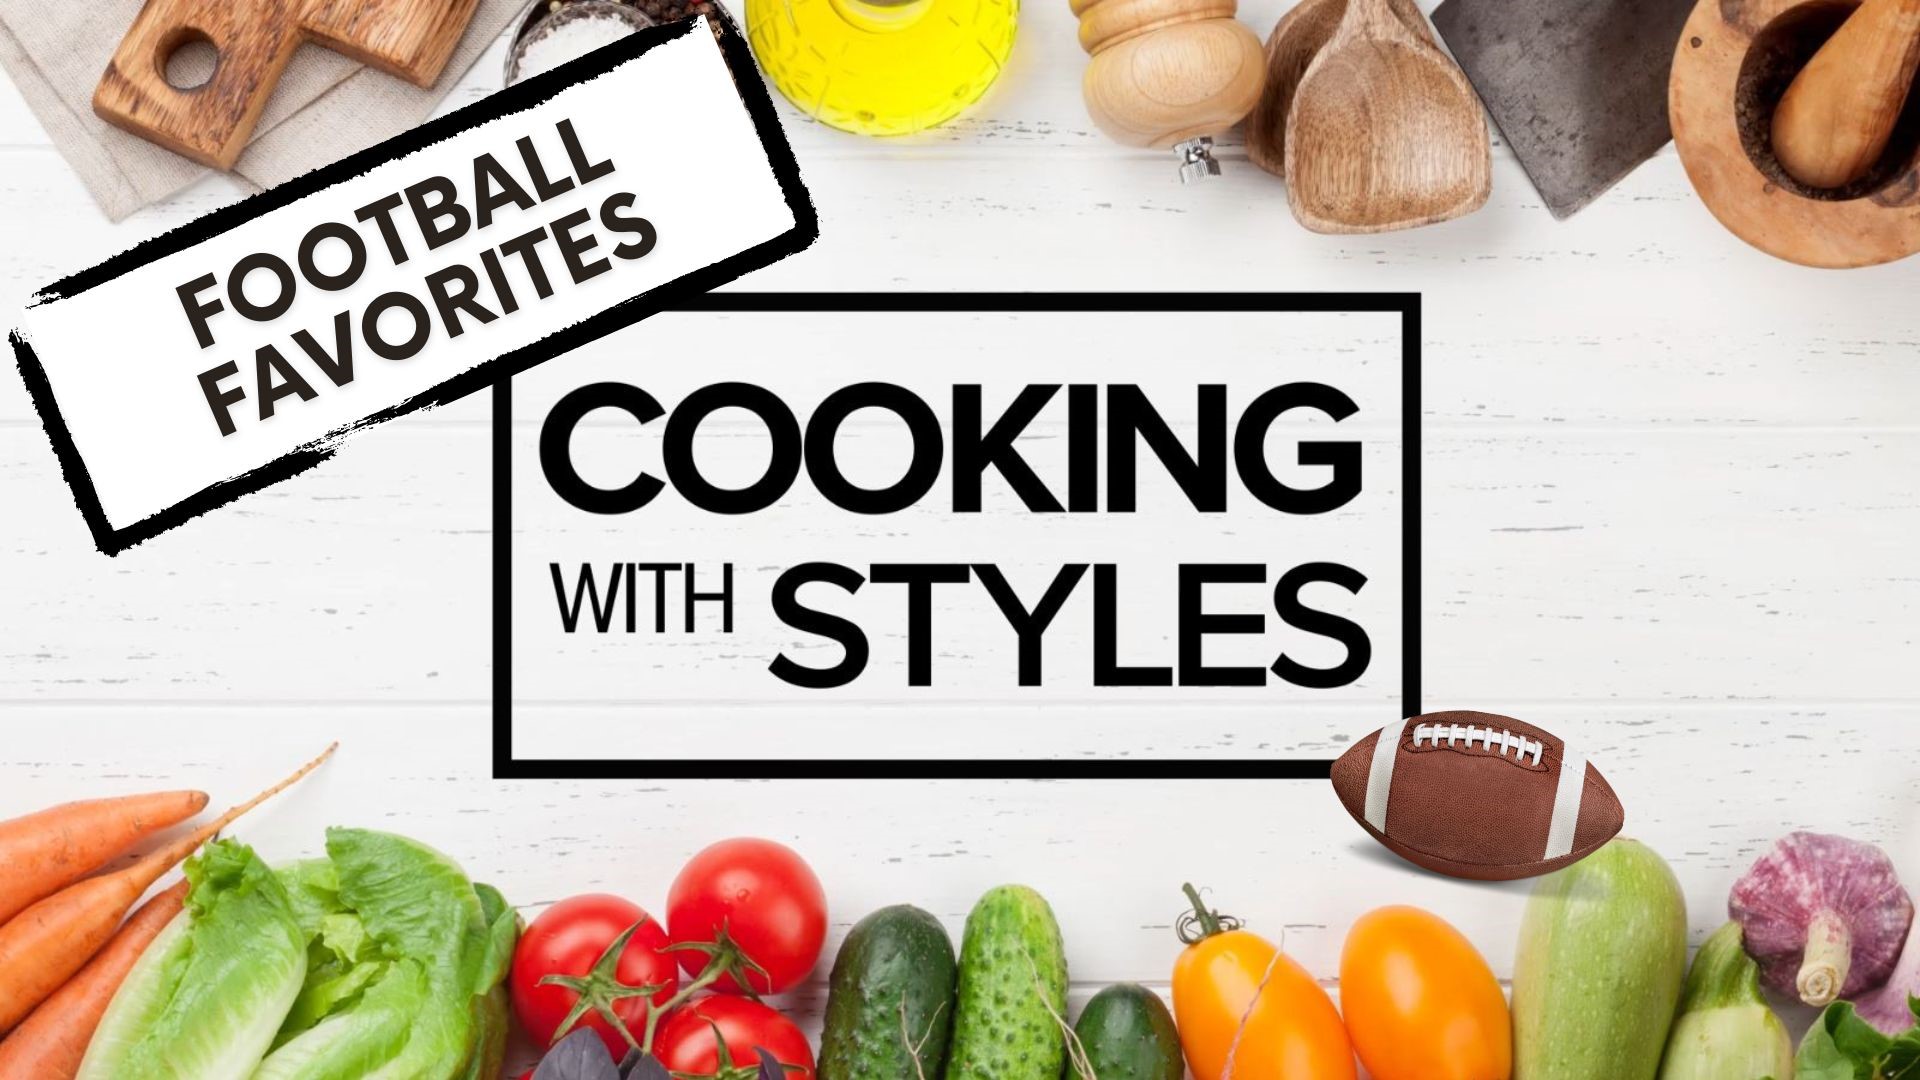 KFMB's Shawn Styles shares some recipes to make your football halftime snacks even better. From homemade queso dip to sliders, ideas to elevate your food.